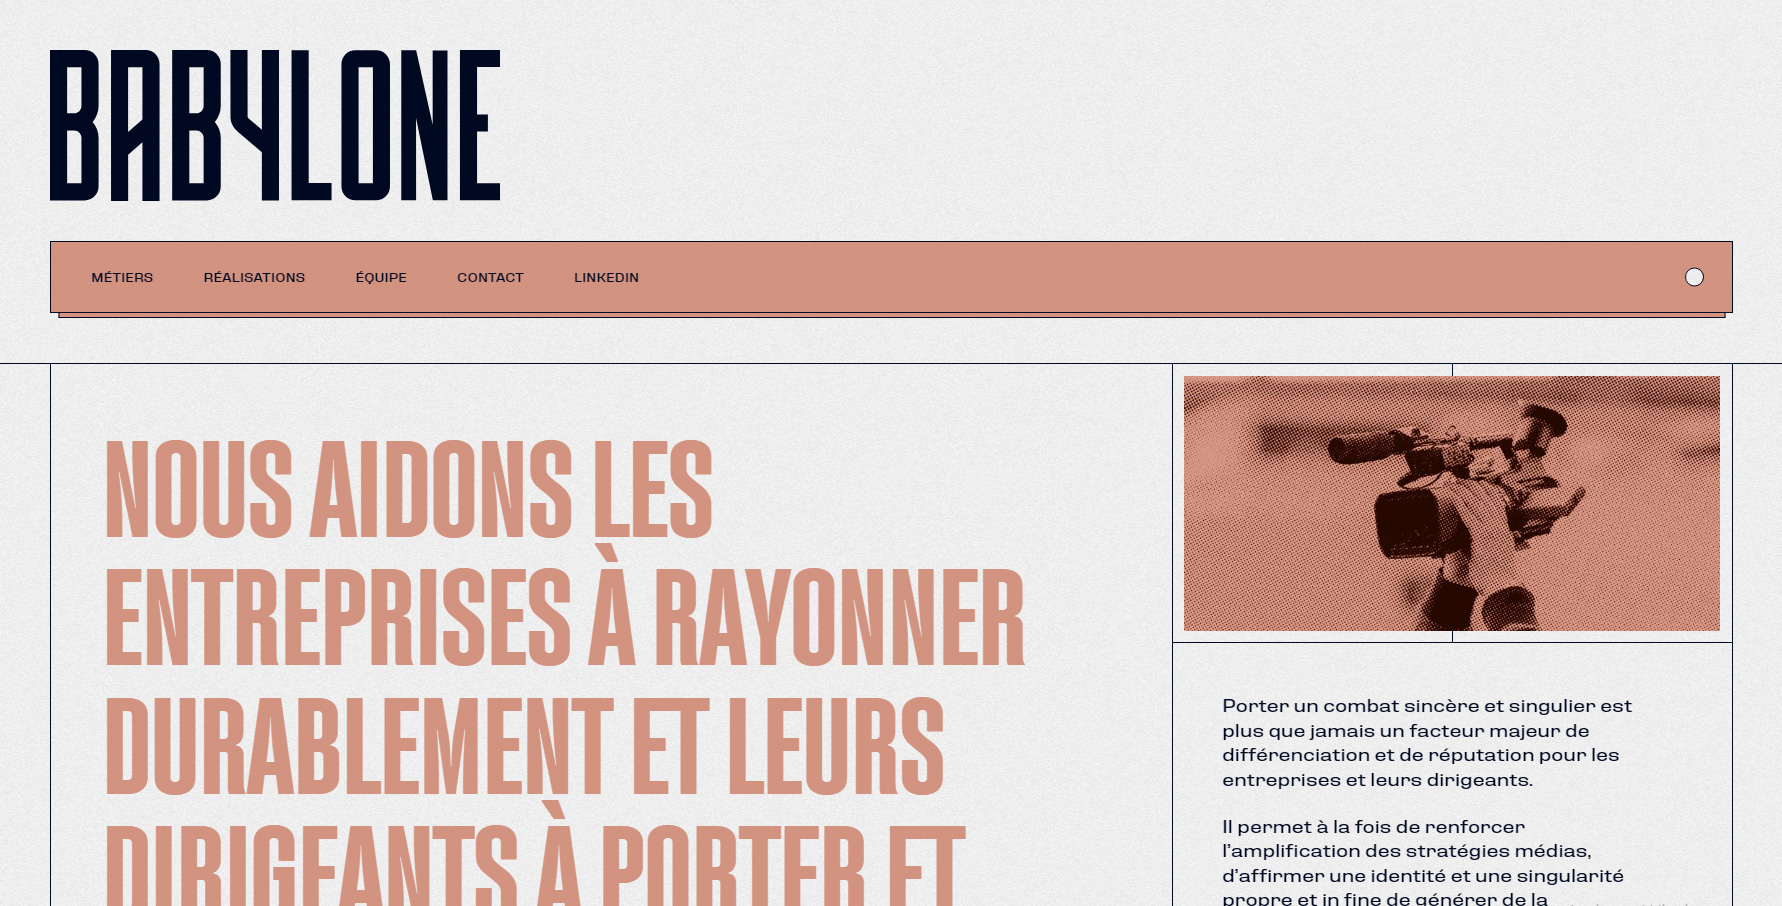 BABYLONE - Website of the Day